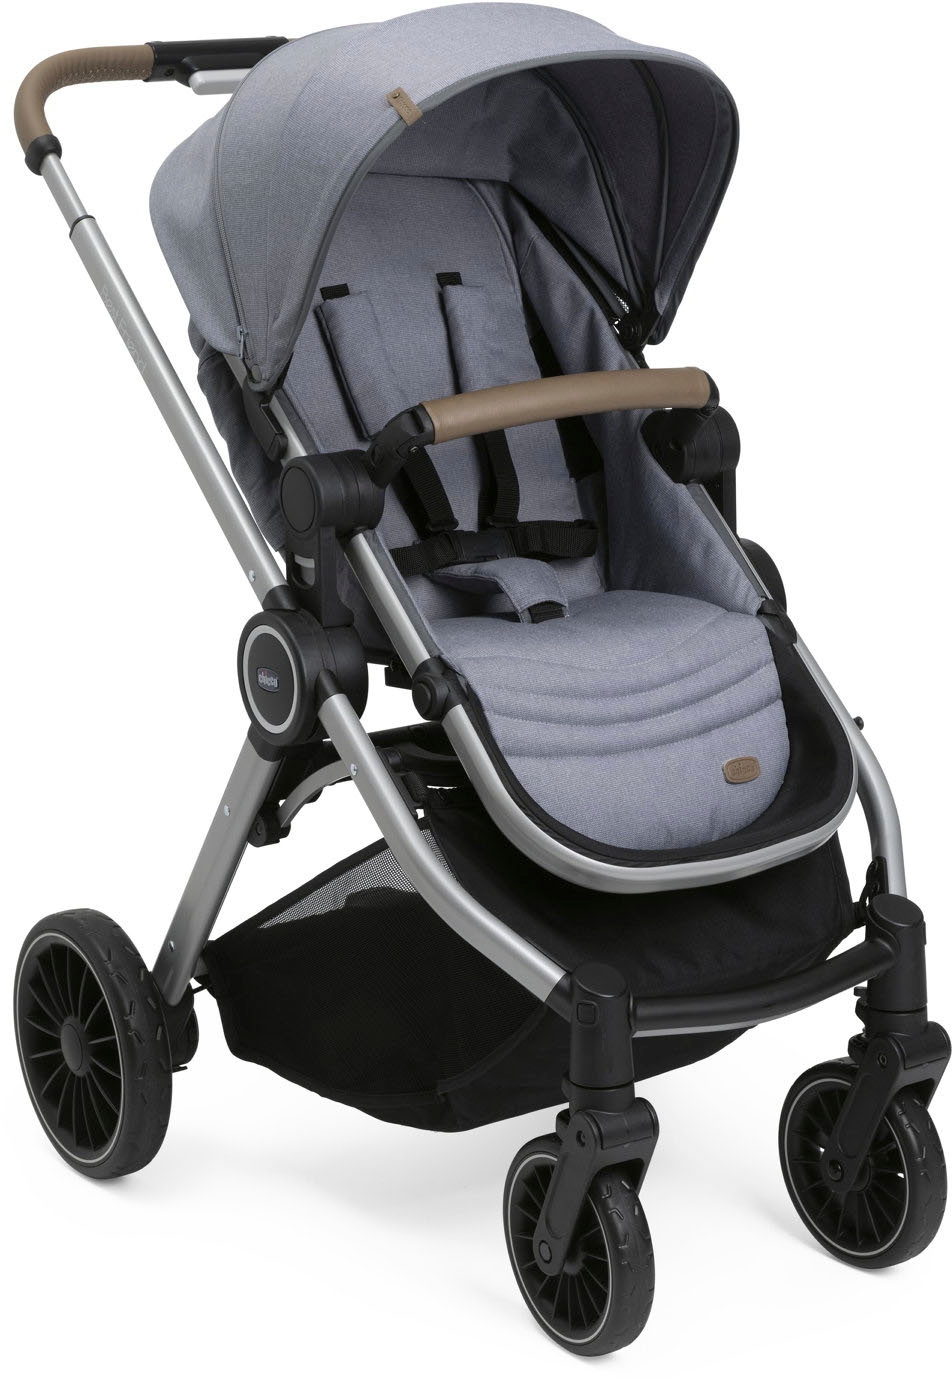 Chicco Sportbuggy »Buggy Best Friend Pro magn...